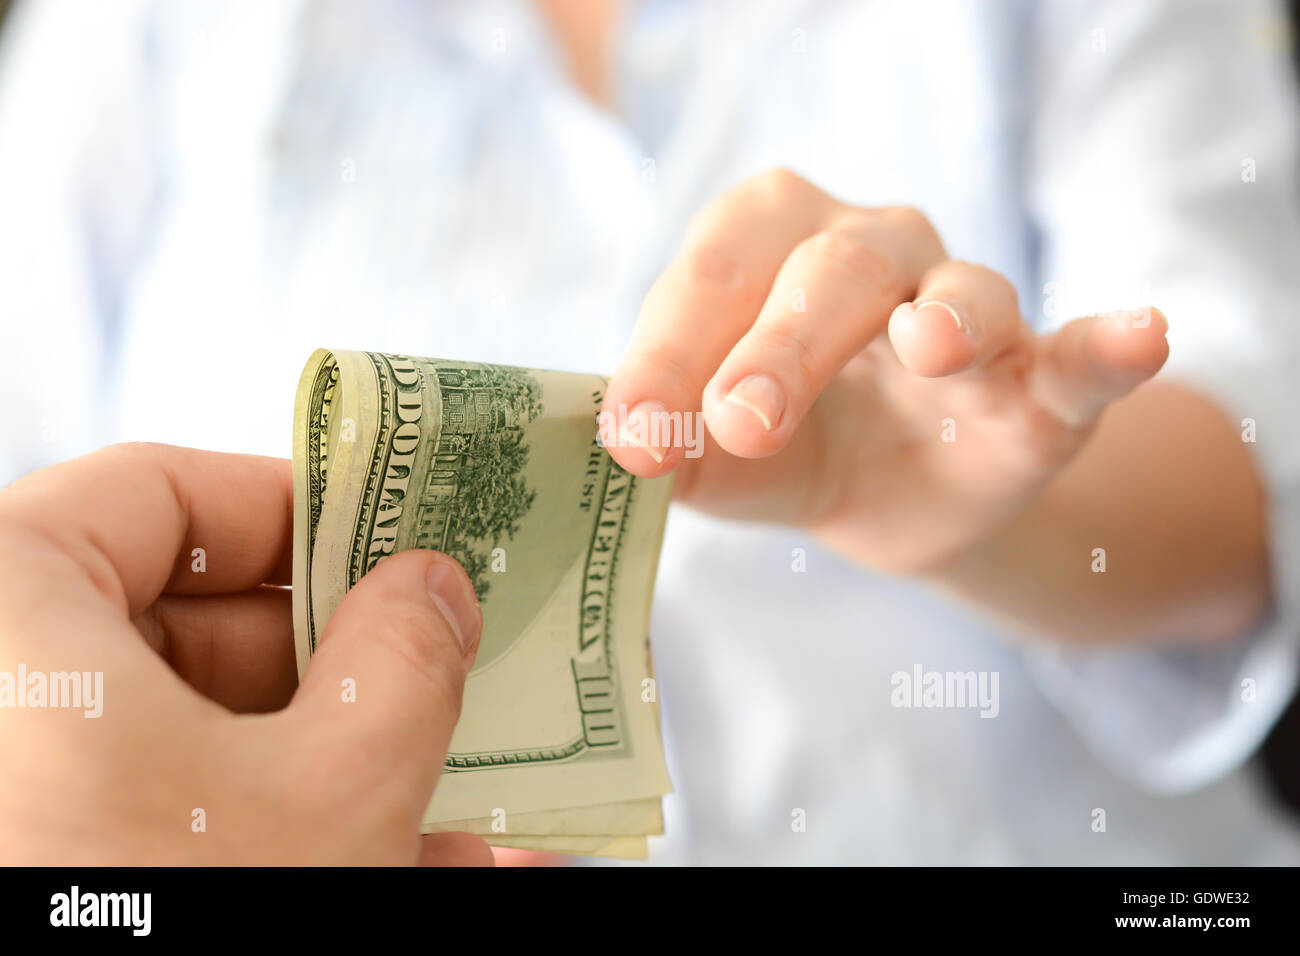 Give money to someone as bribe to suggest a corrupt system Stock Photo